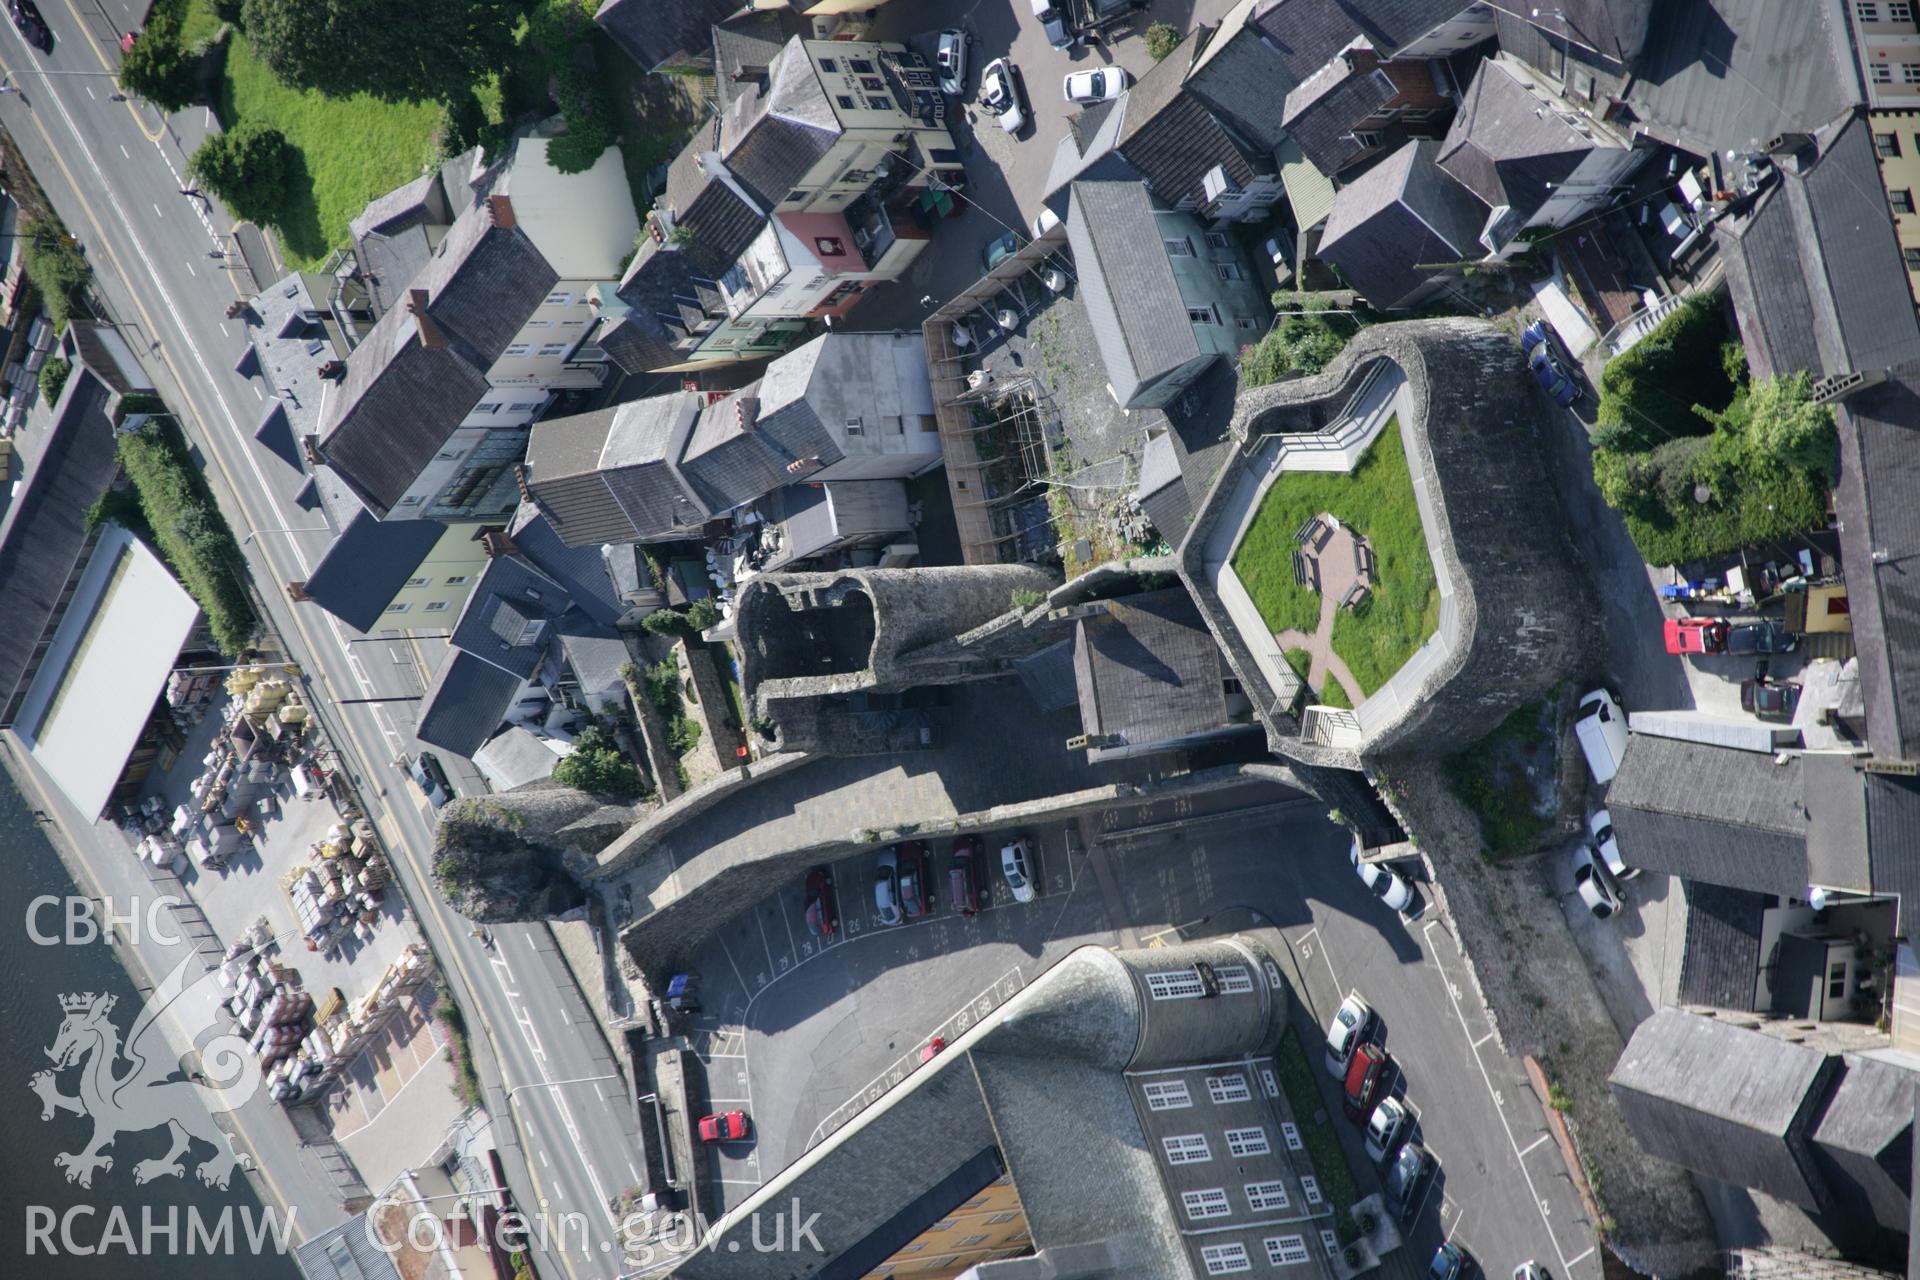 RCAHMW colour oblique aerial photograph of Carmarthen Castle from the north-east. Taken on 09 June 2005 by Toby Driver